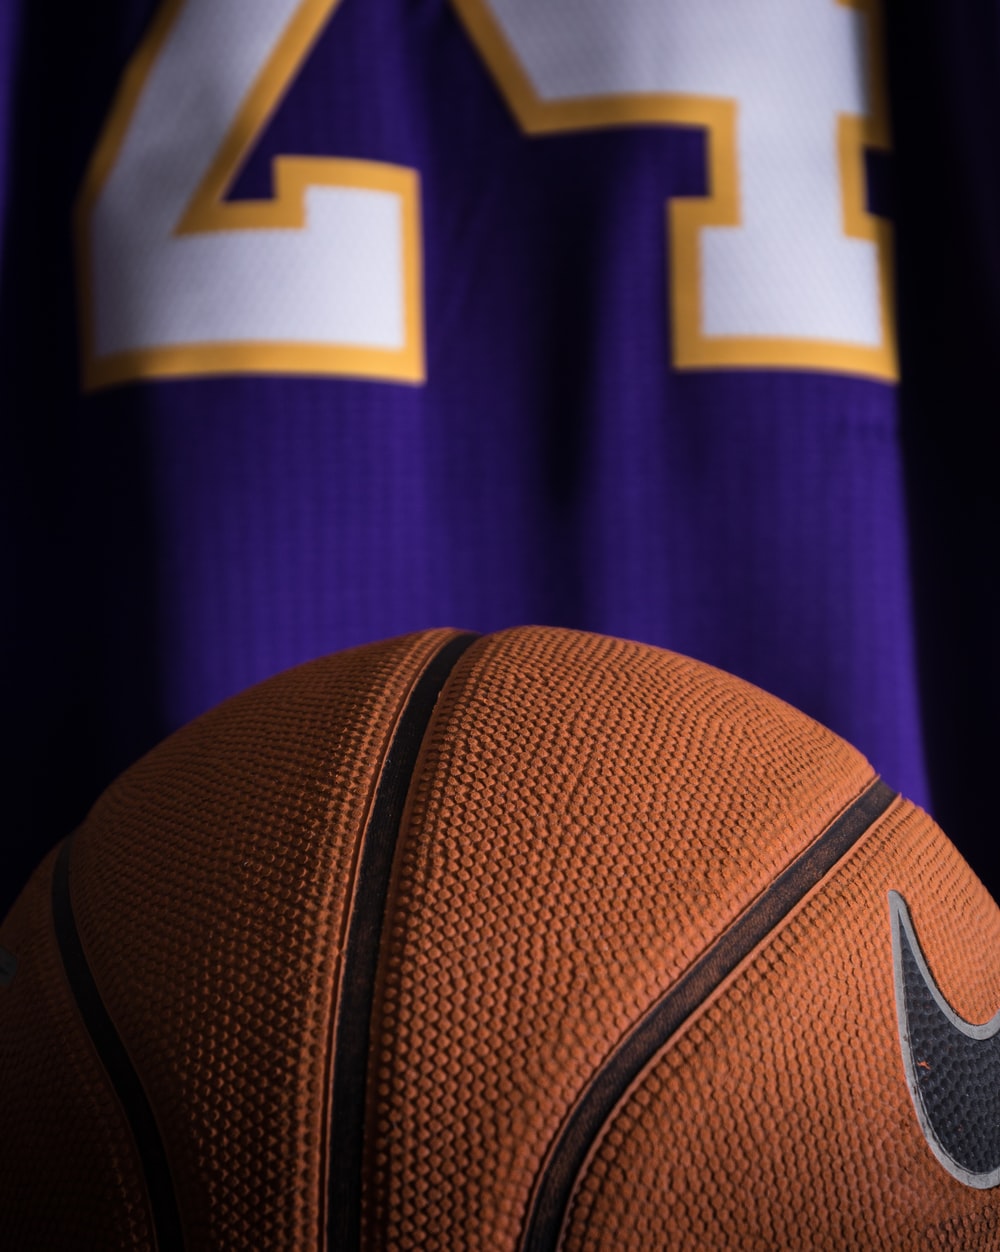 Los Angeles Lakers Picture. Download Free Image